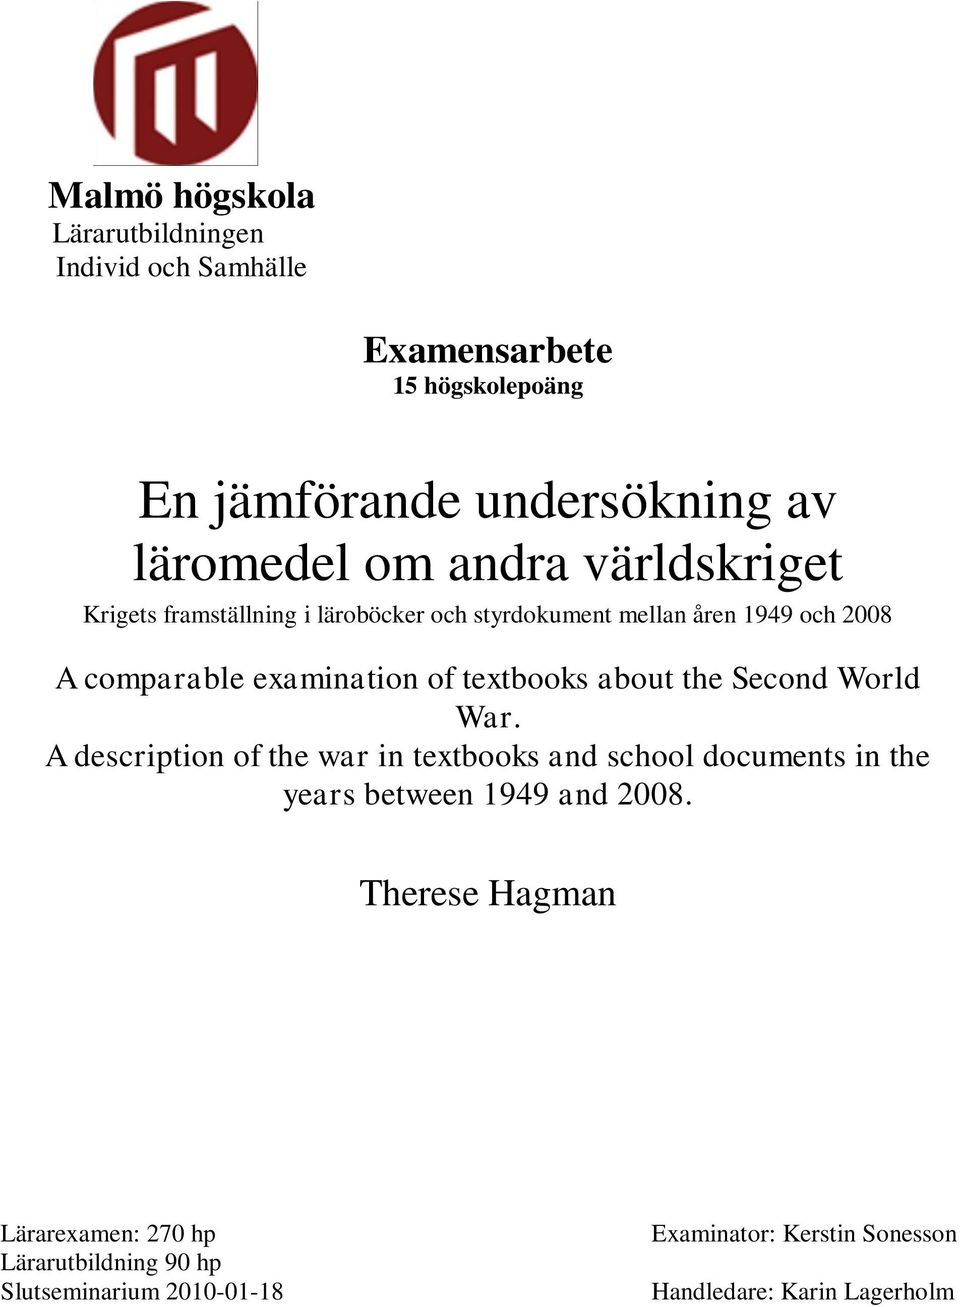 Second World War. A description of the war in textbooks and school documents in the years between 1949 and 2008.